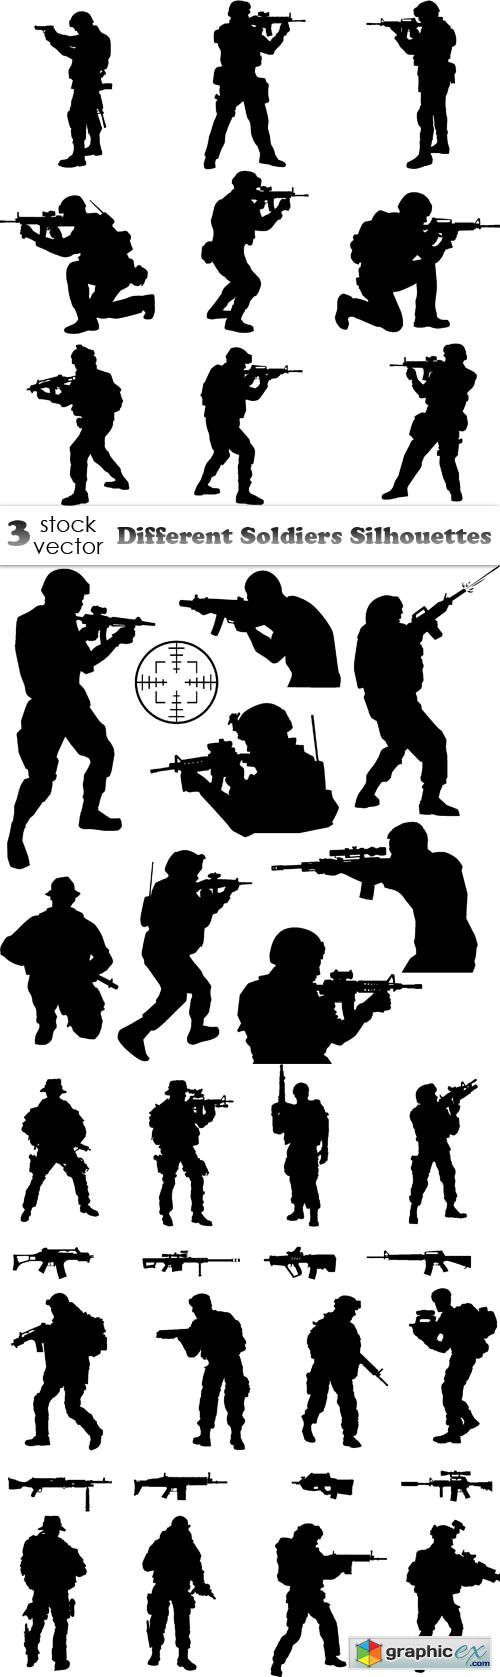 Different Soldiers Silhouettes